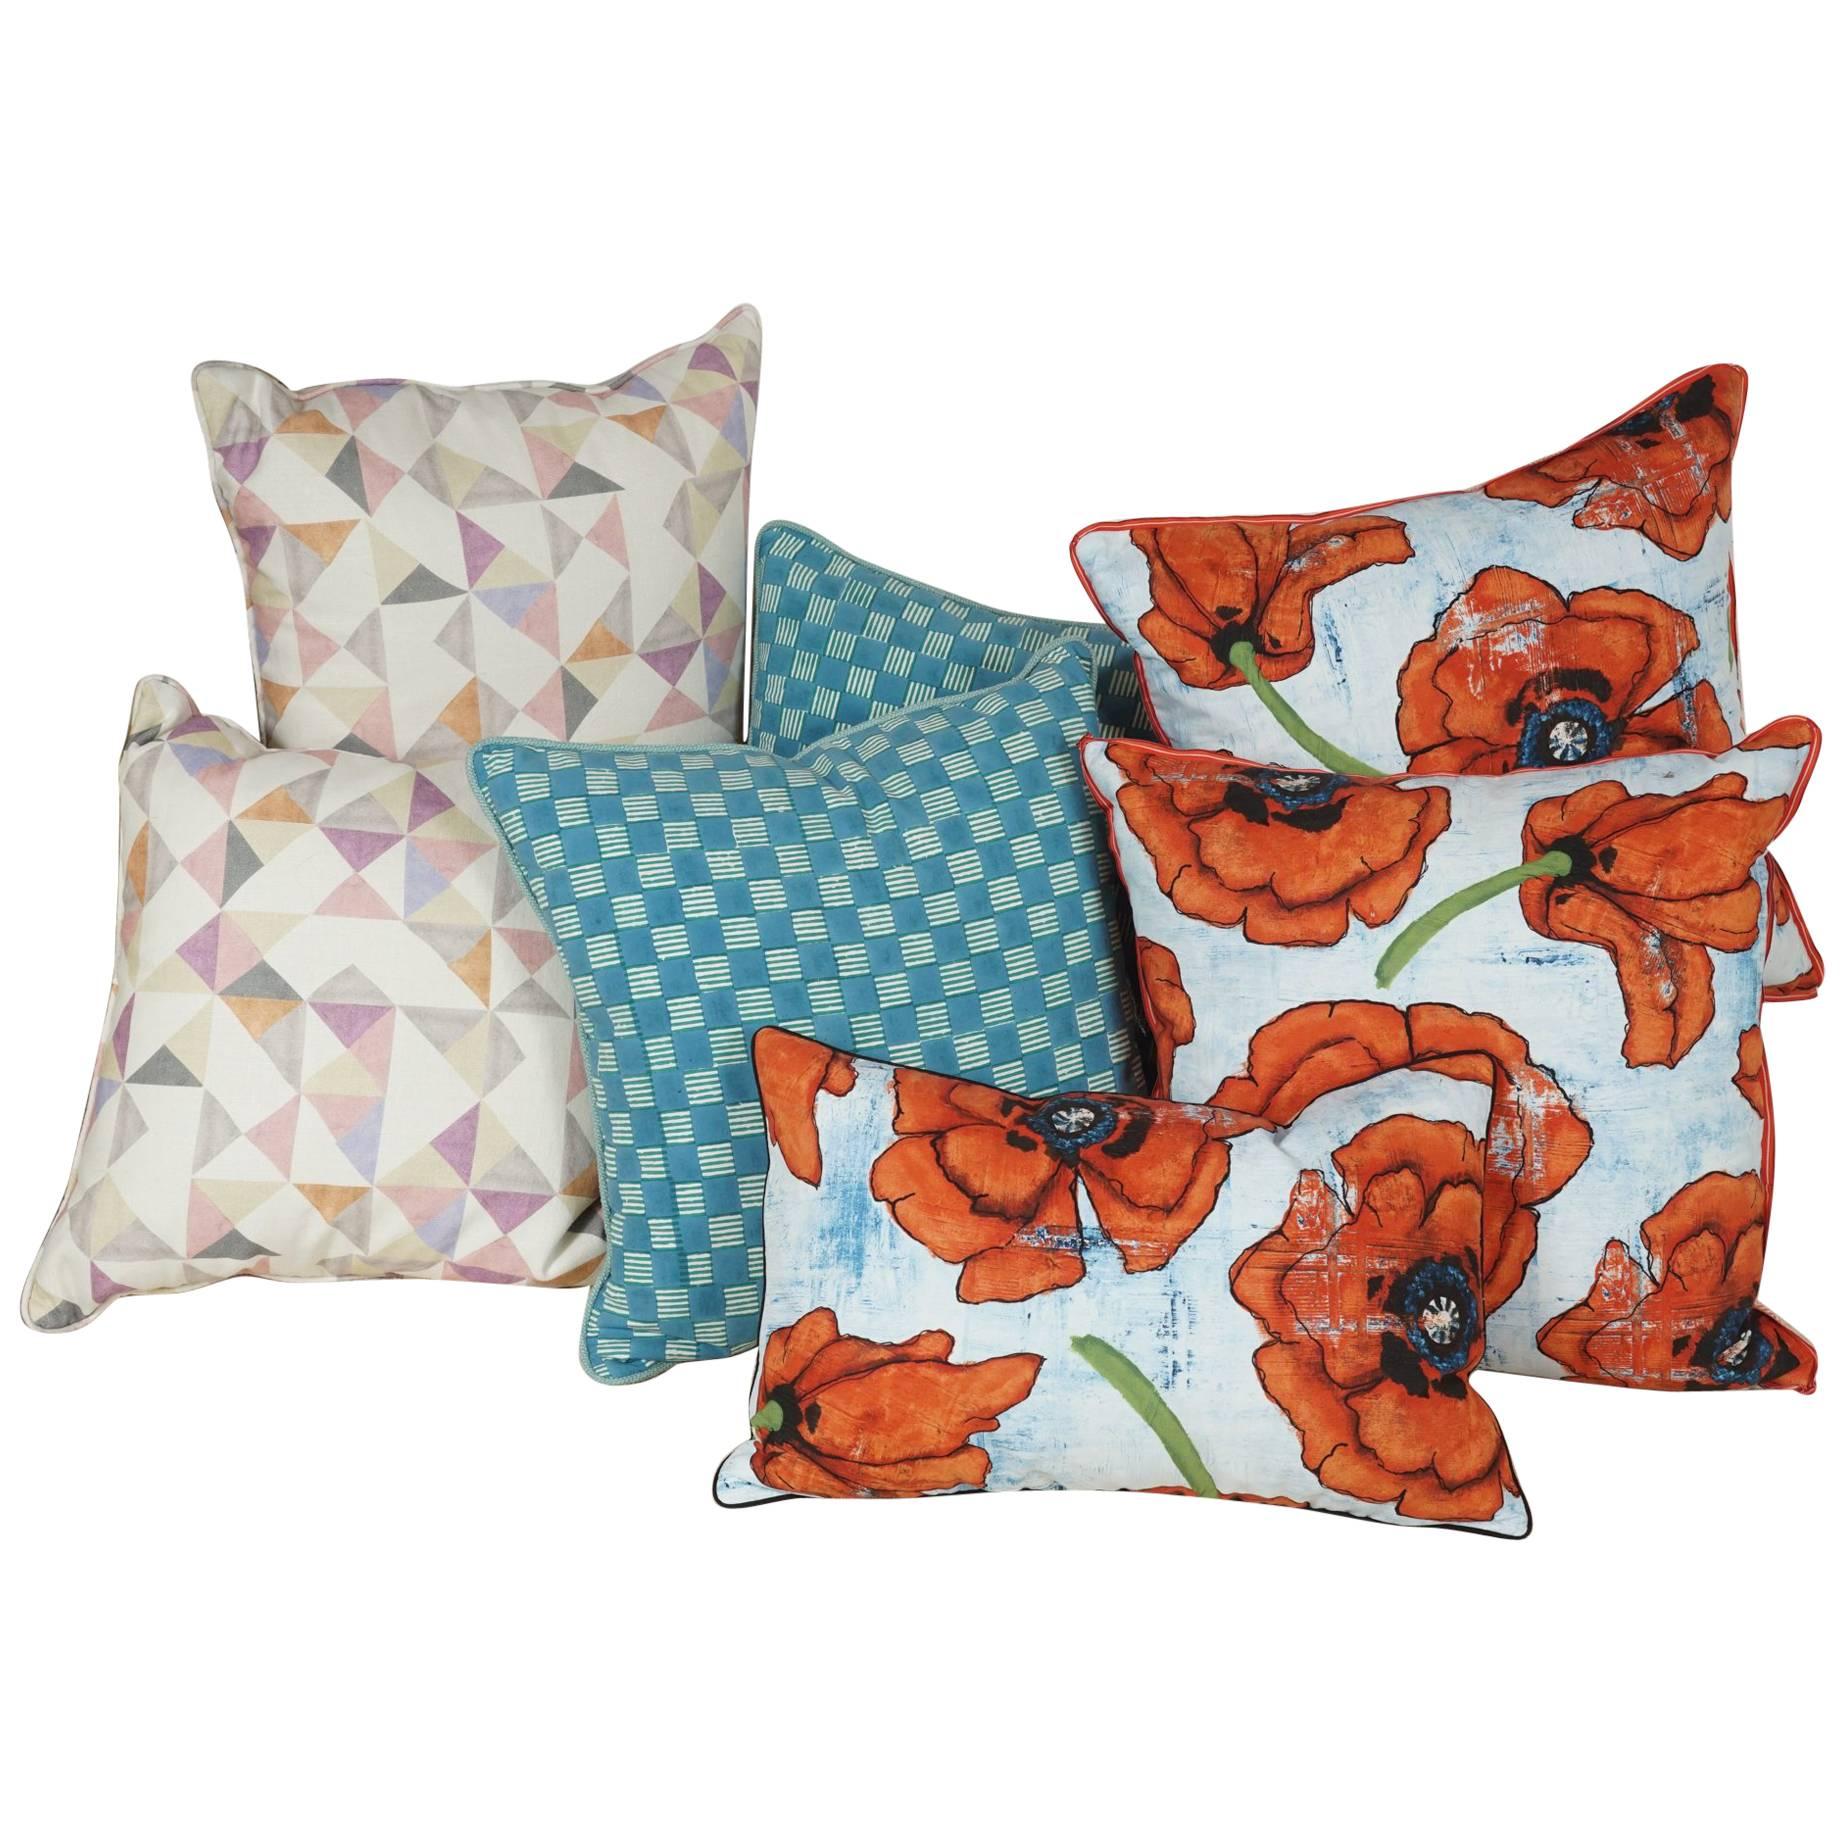 Assortment of Pillows in Hand Blocked Fabrics For Sale